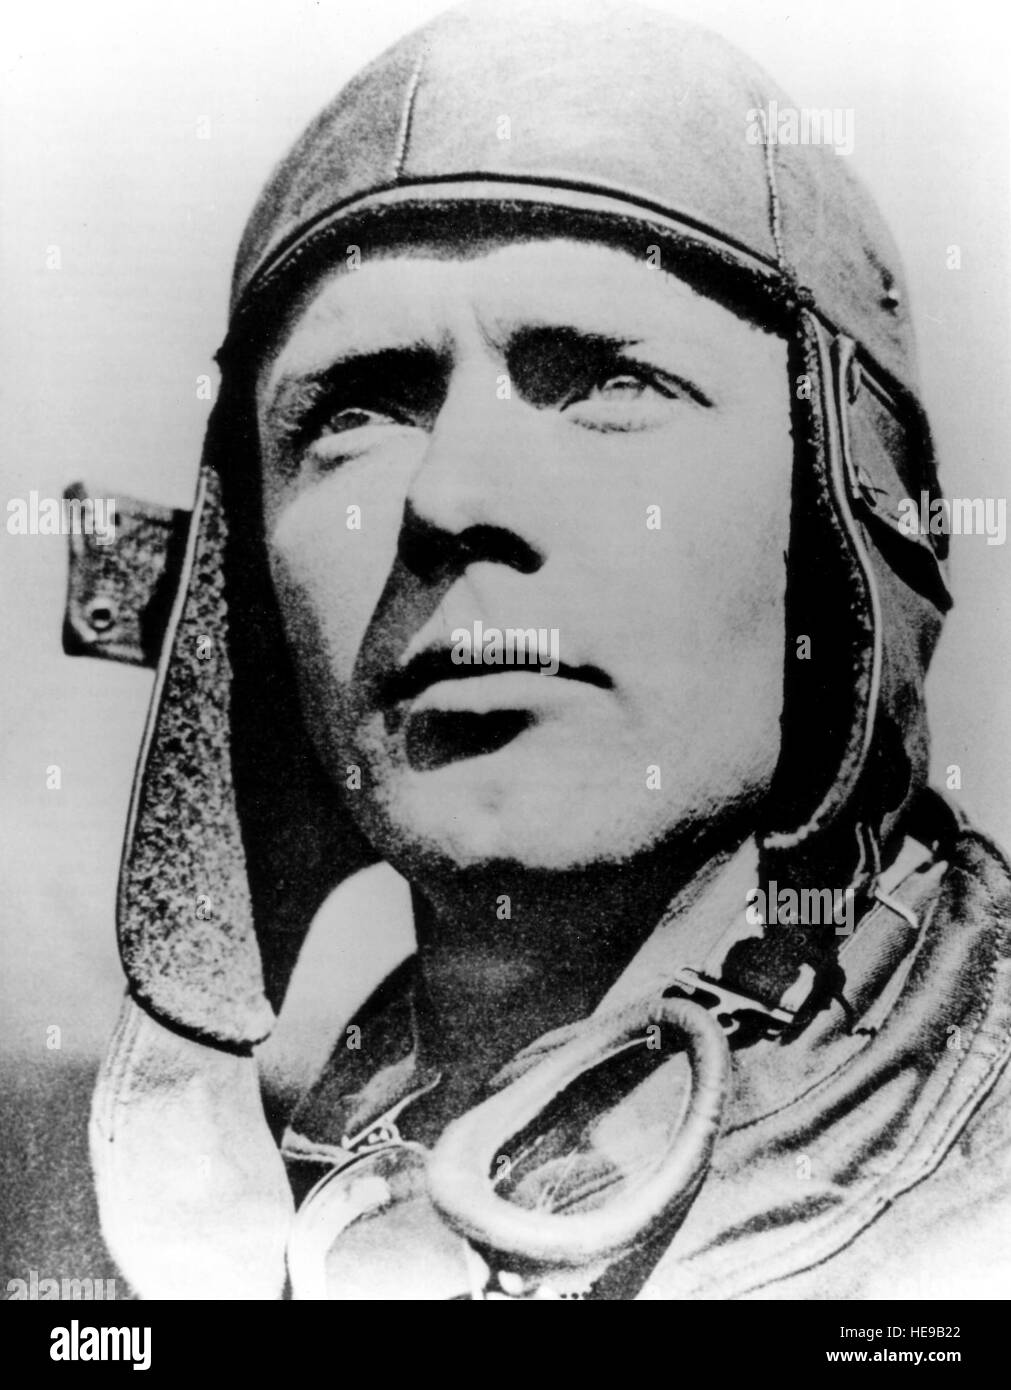 MAY 21, 1927 -- Charles Augustus Lindberg becomes the first man to fly solo across the Atlantic Ocean.  Flying in his 'Spirit of St. Louis' he takes less than 34 hours to fly from Roosevelt Field, near New York City, to Paris, France.  He was greeted upon his arrival by a frenzied crowd of more than 100,000 people at Le Bourget Field. (U.S. ) Stock Photo